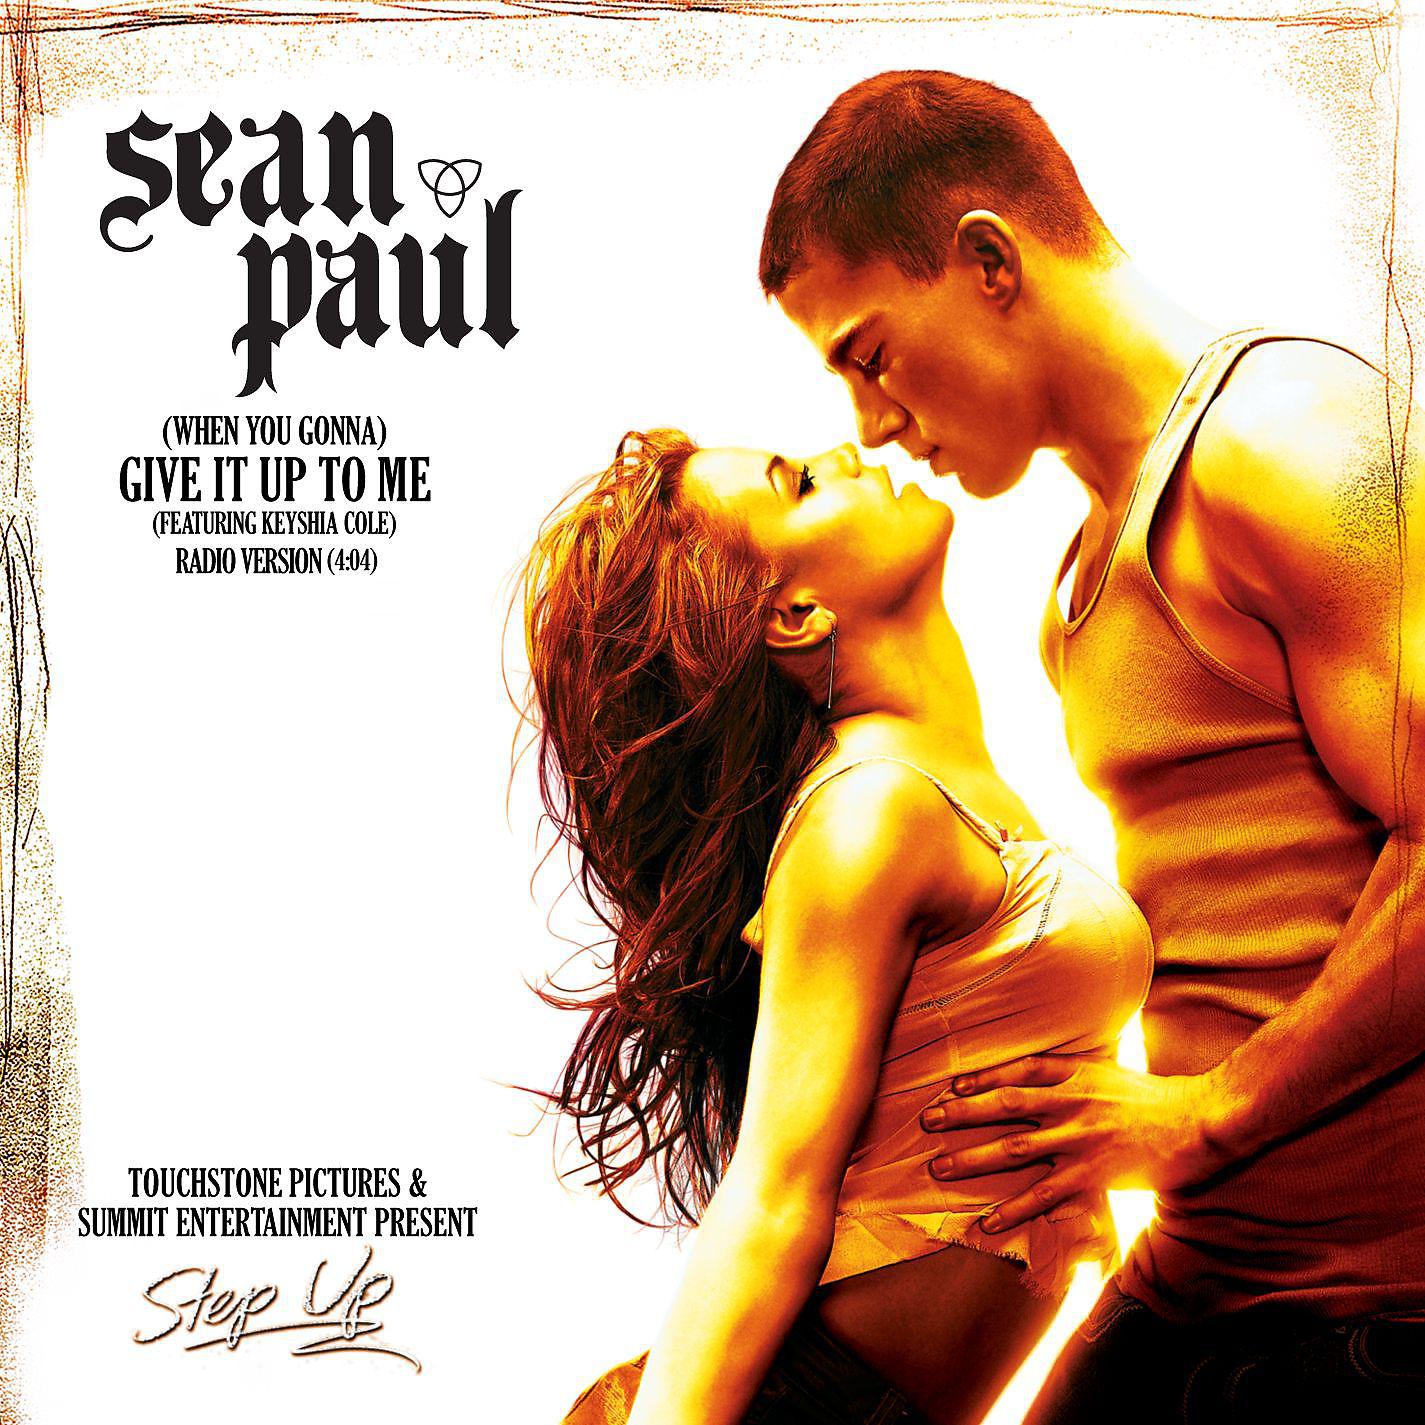 Well give it to her. Sean Paul feat. Keyshia Cole - give it up to me. Sean Paul when you gonna give it up to me. Sean Paul-give it to me. Шон пол шаг вперед.